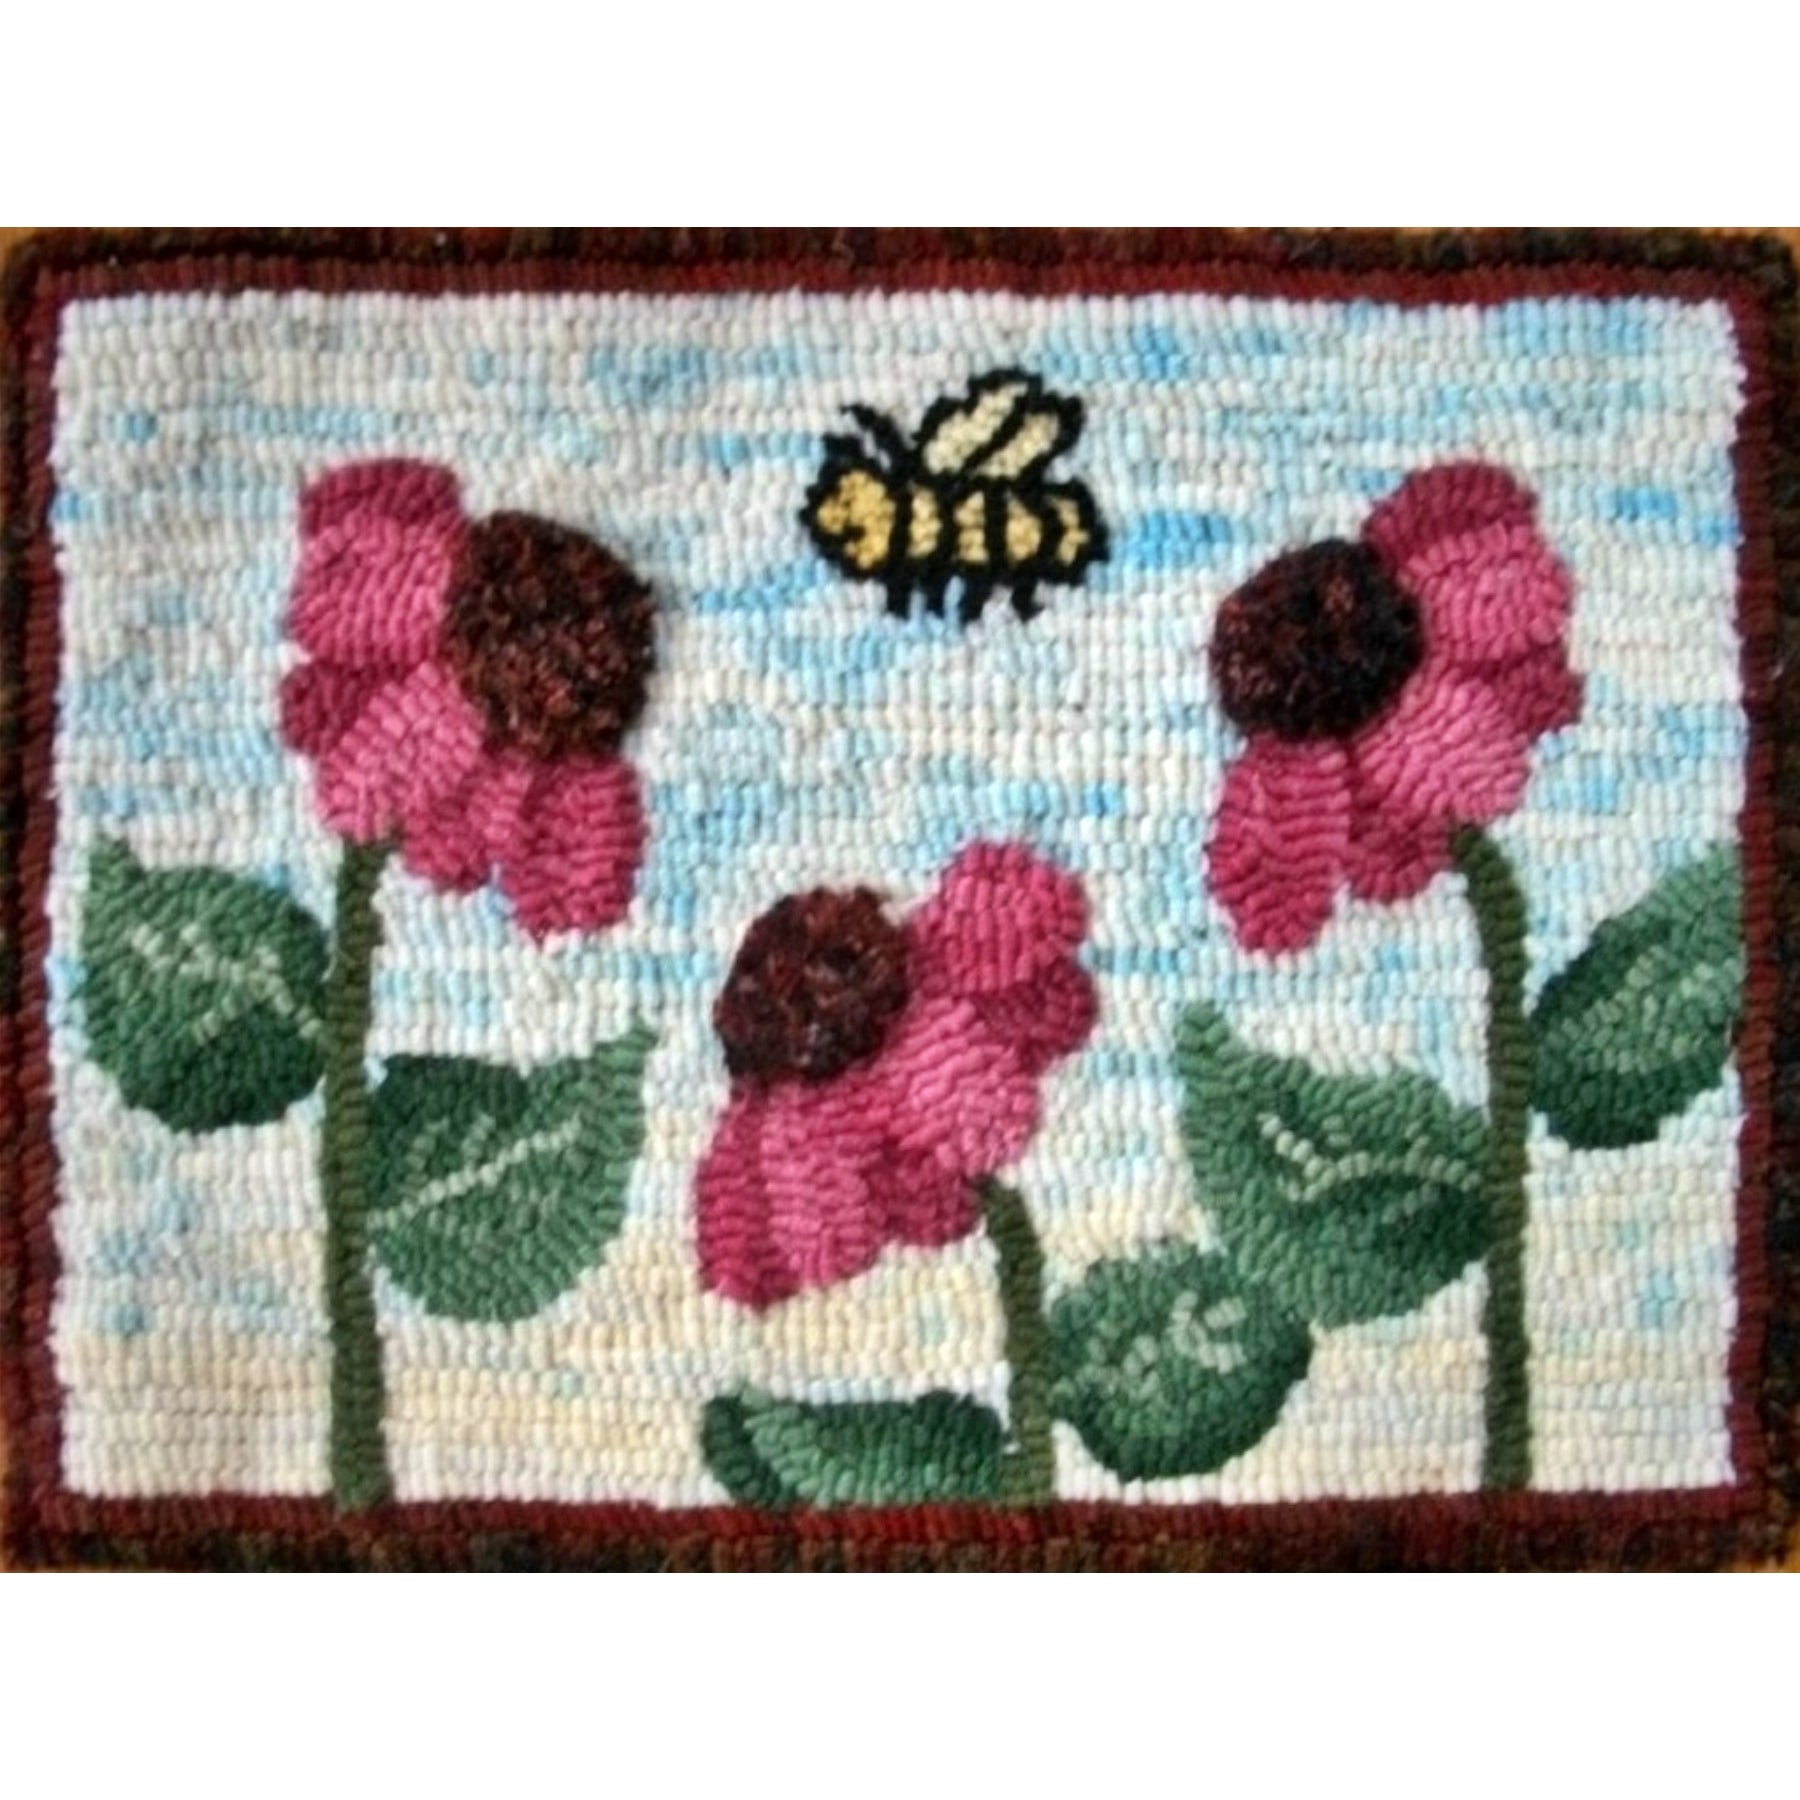 3 Not Daisies, rug hooked by Connie Bradley